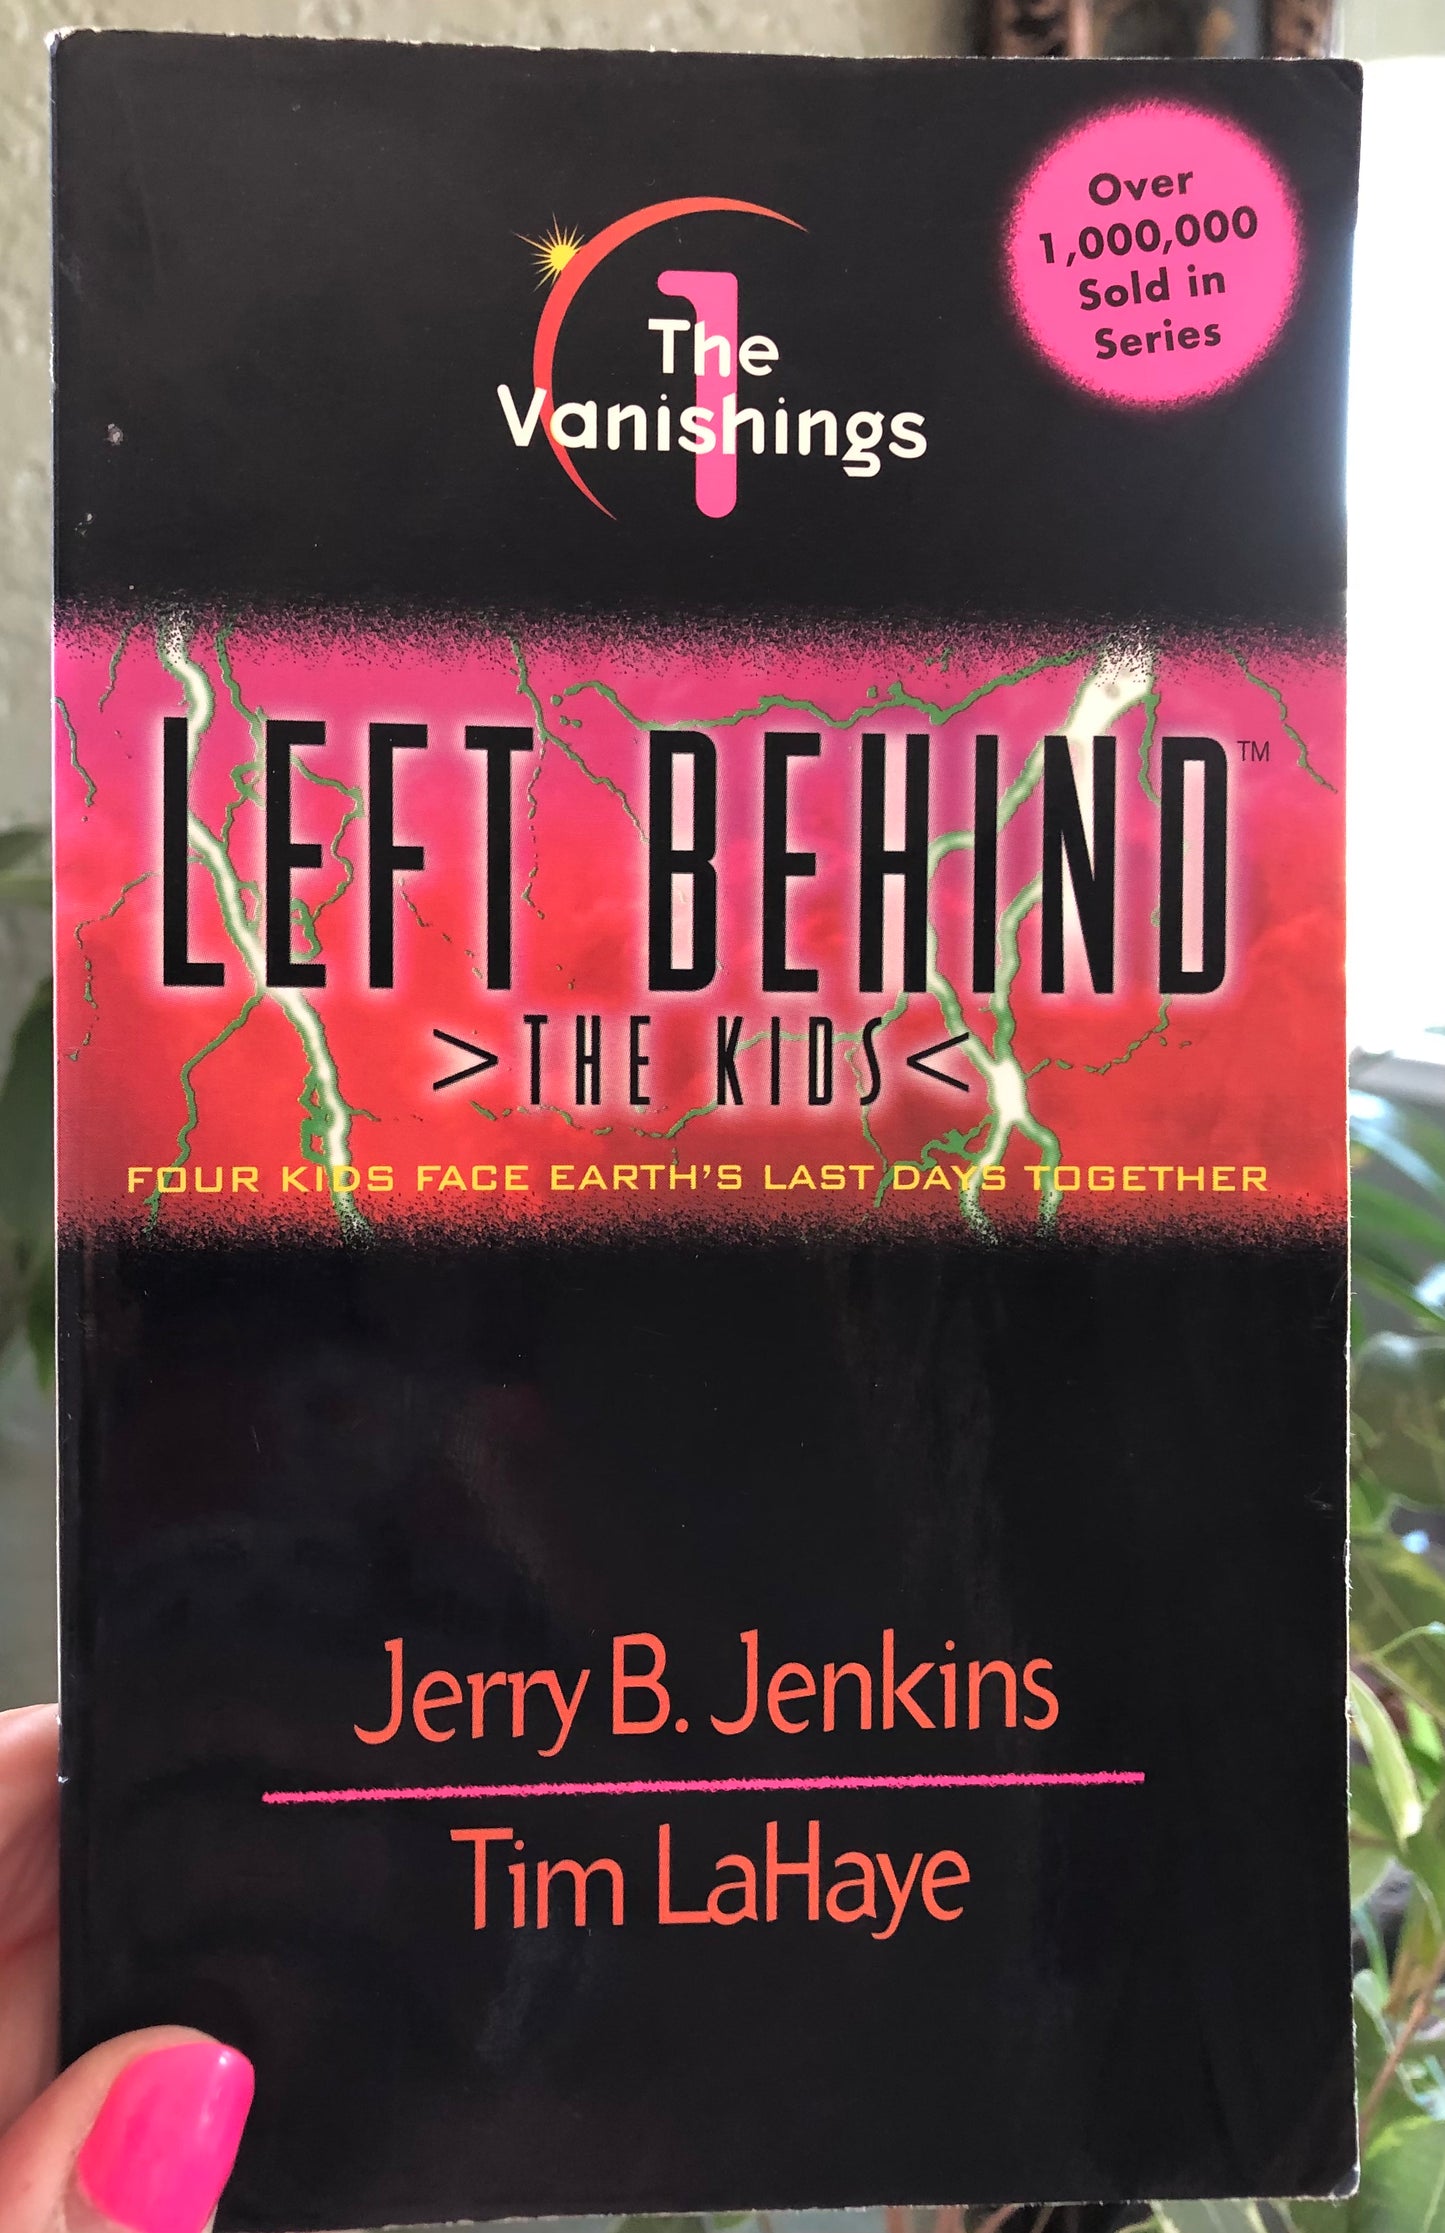 Left Behind-- The Kids by Jerry B. Jenkins